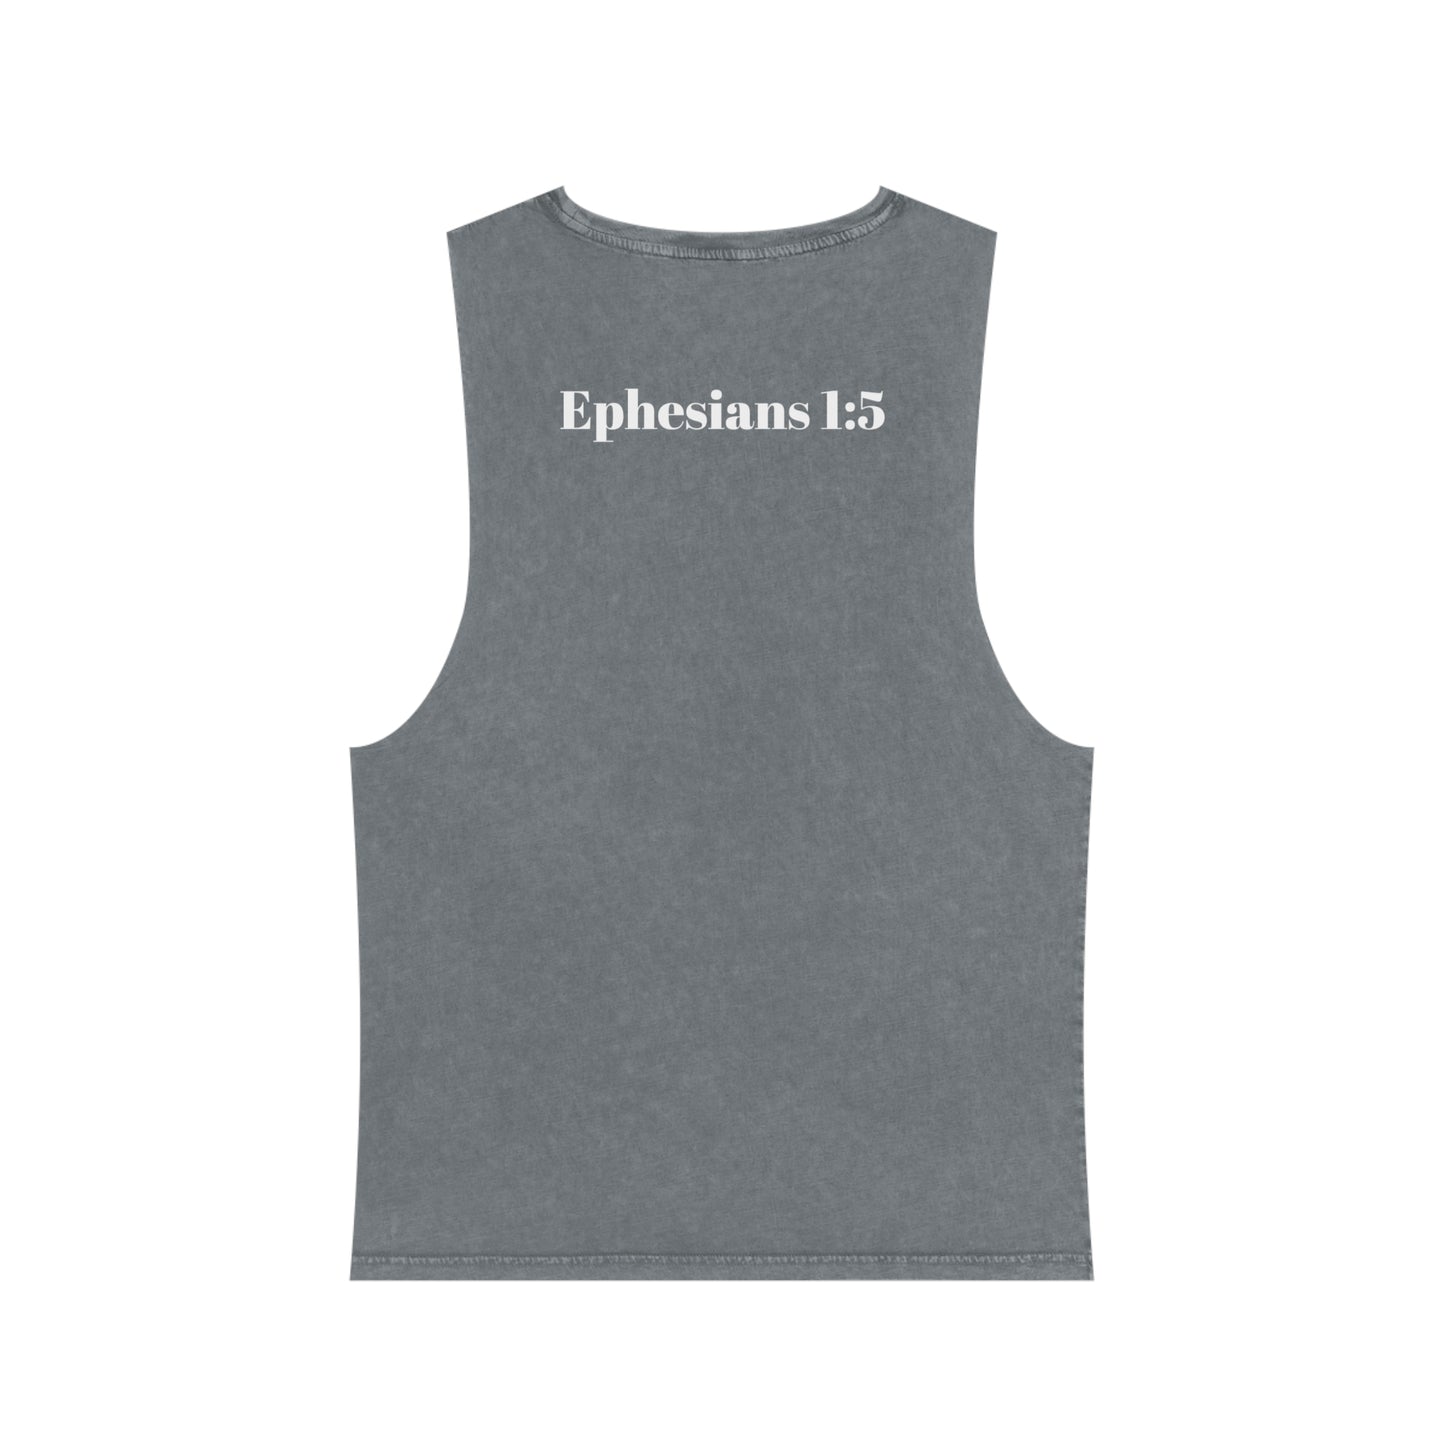 Fostered by the Father Unisex Stonewash Tank Top